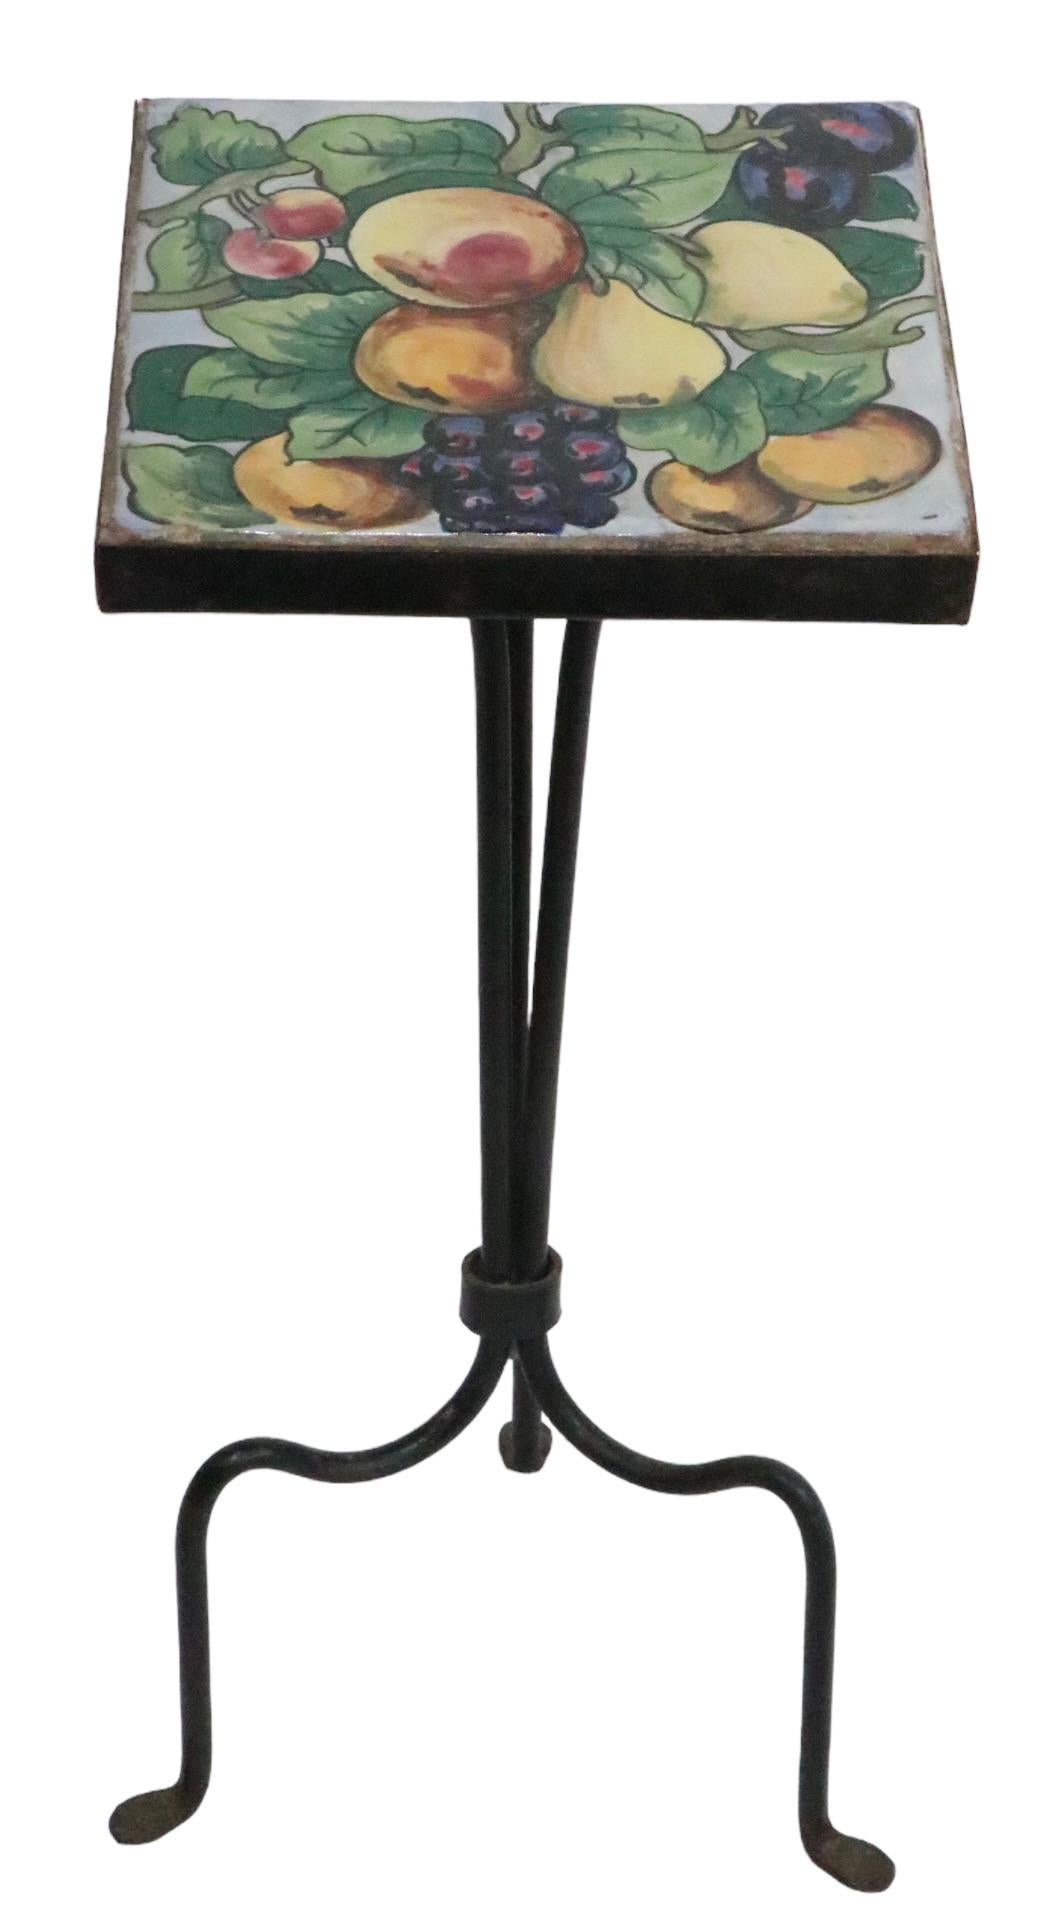 Wrought iron and Tile Top Table att. to Addison Mizner c 1920's For Sale 2